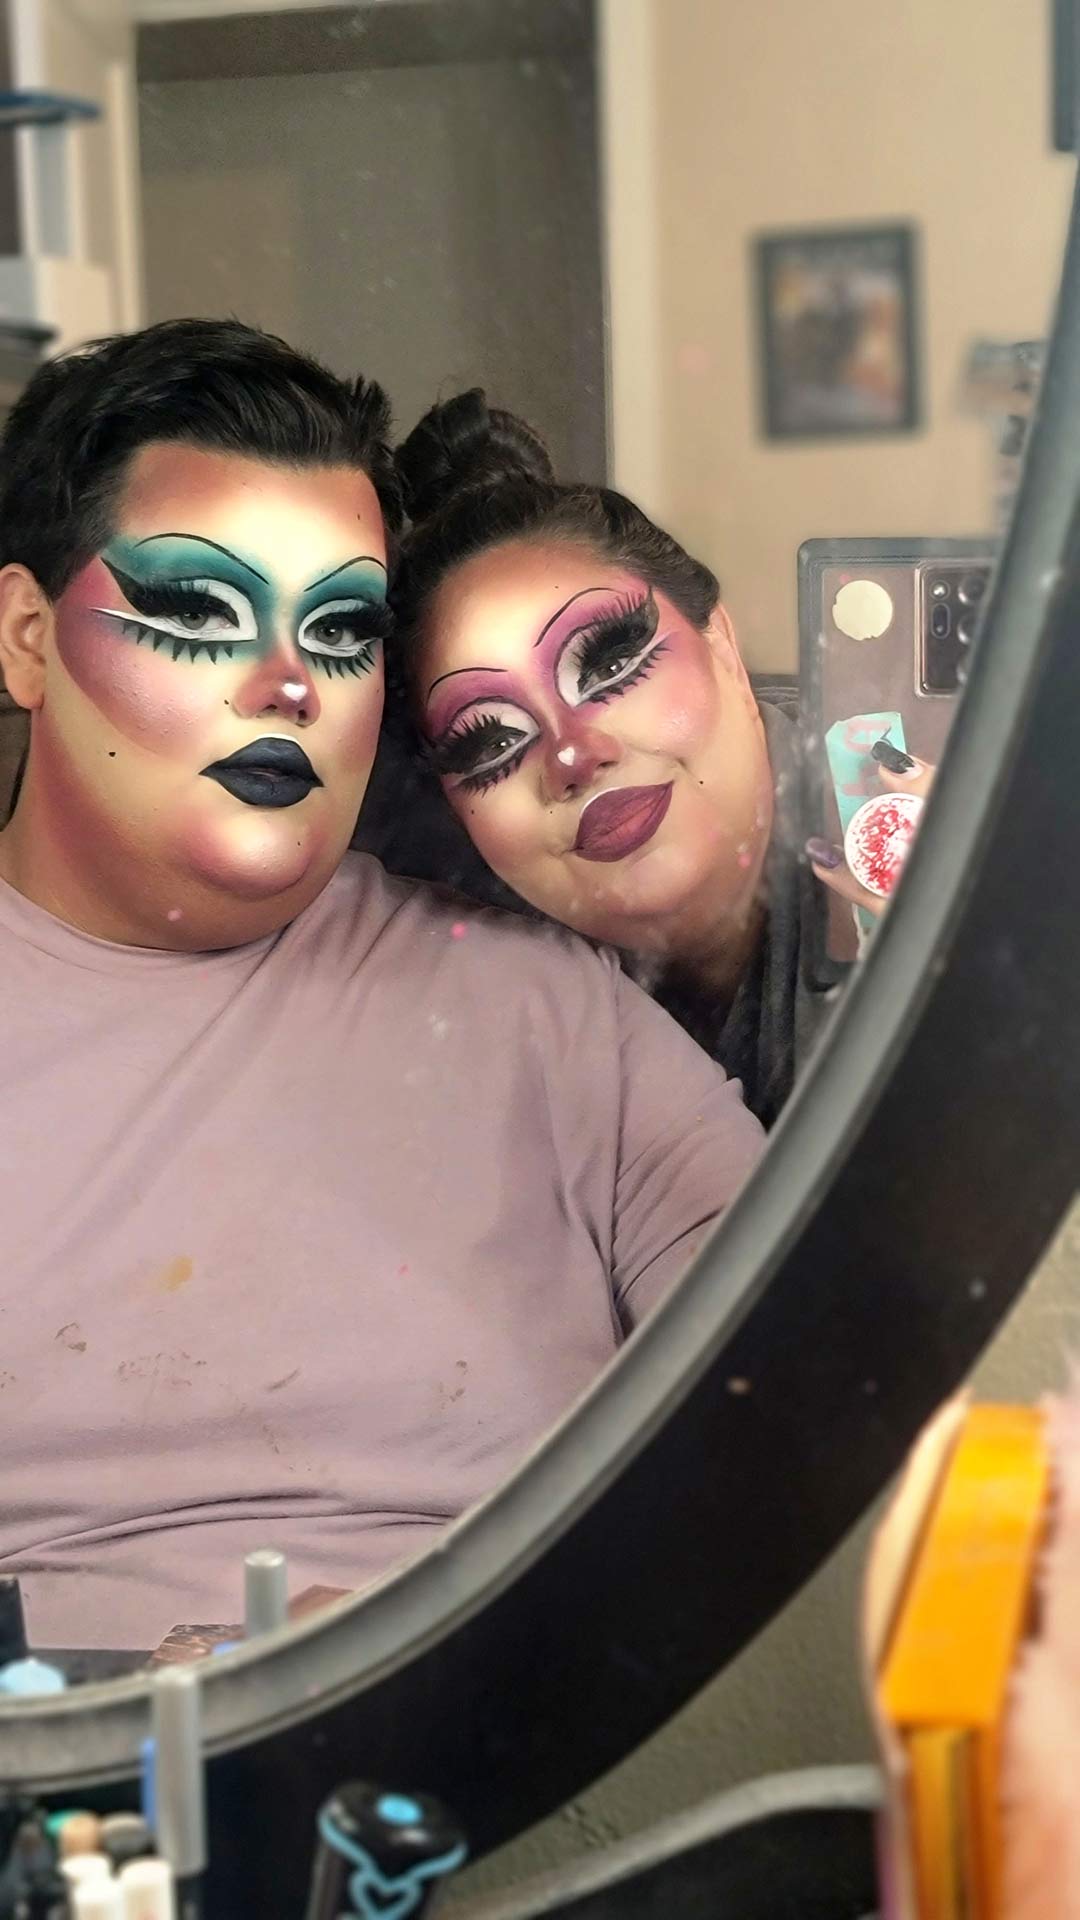 Adrian and Theresa in Drag Makeup